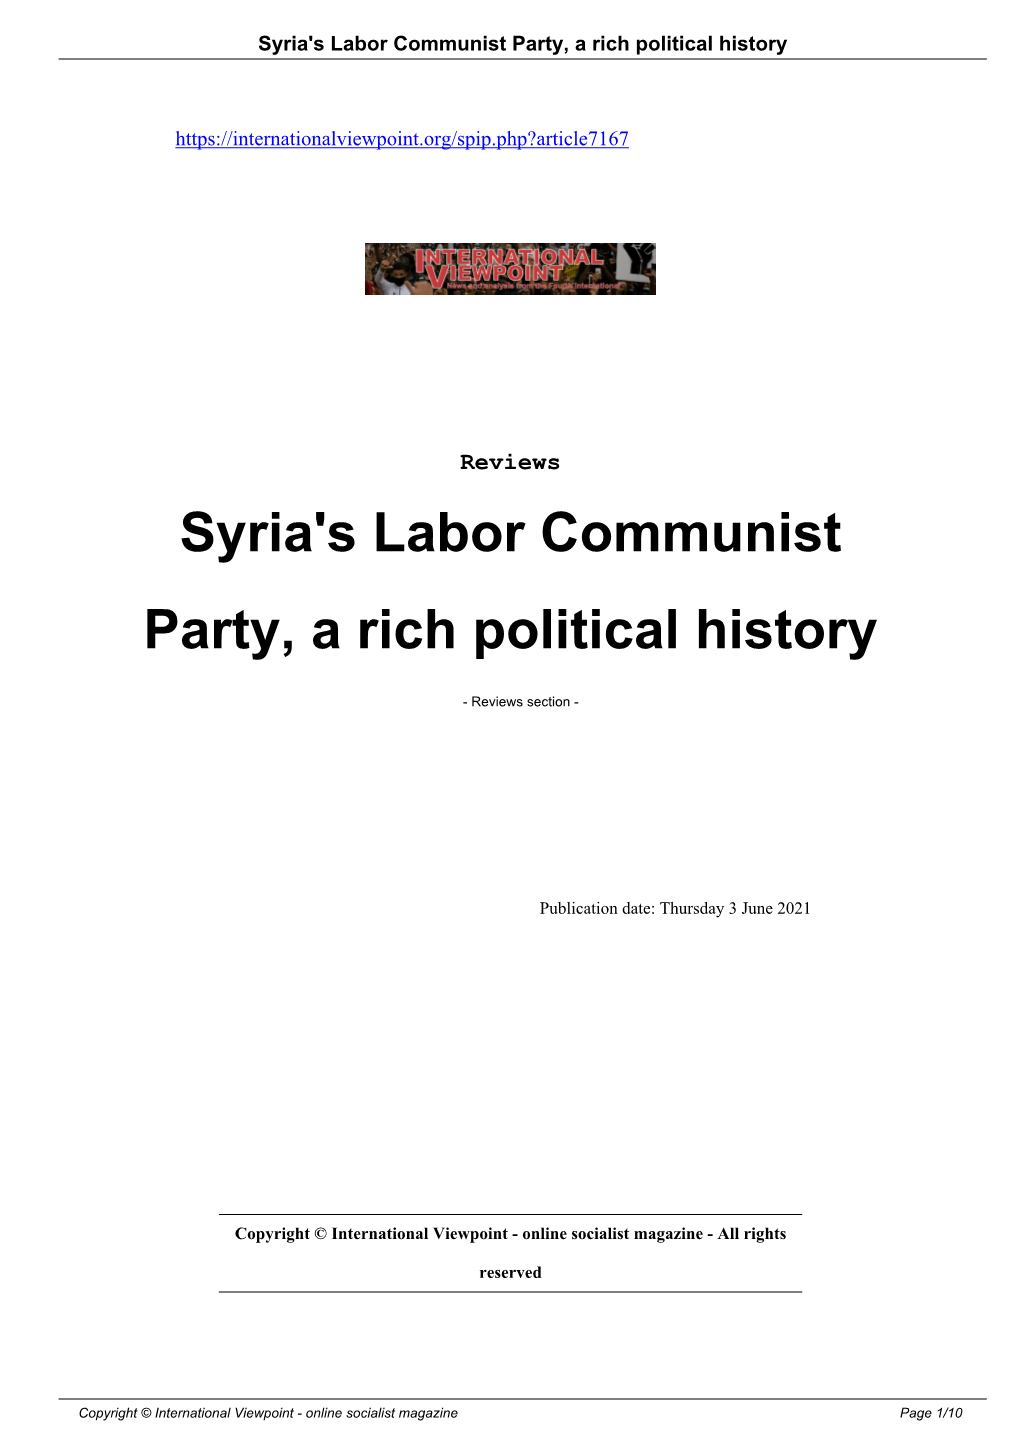 Syria's Labor Communist Party, a Rich Political History